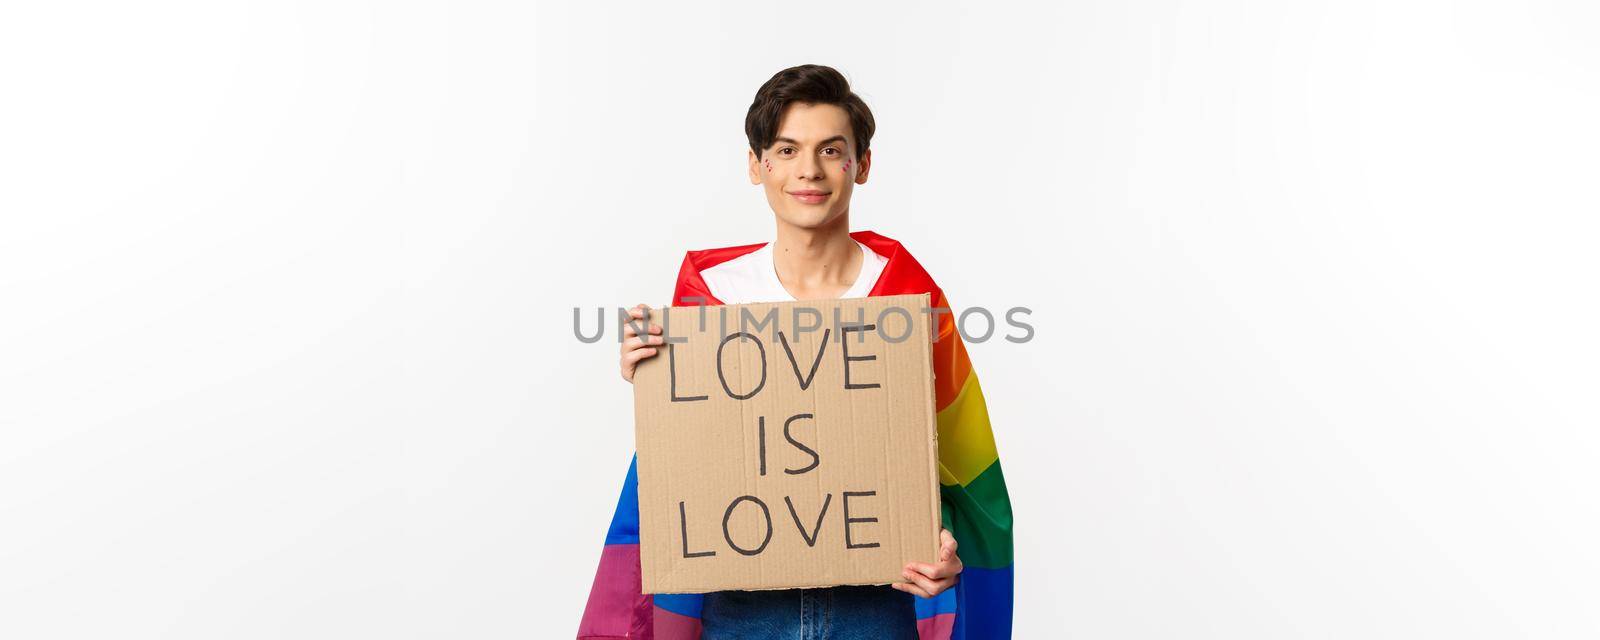 Smiling gay man activist holding sign love is love for lgbt pride parade, wearing Rainbow flag, standing over white background. Copy space